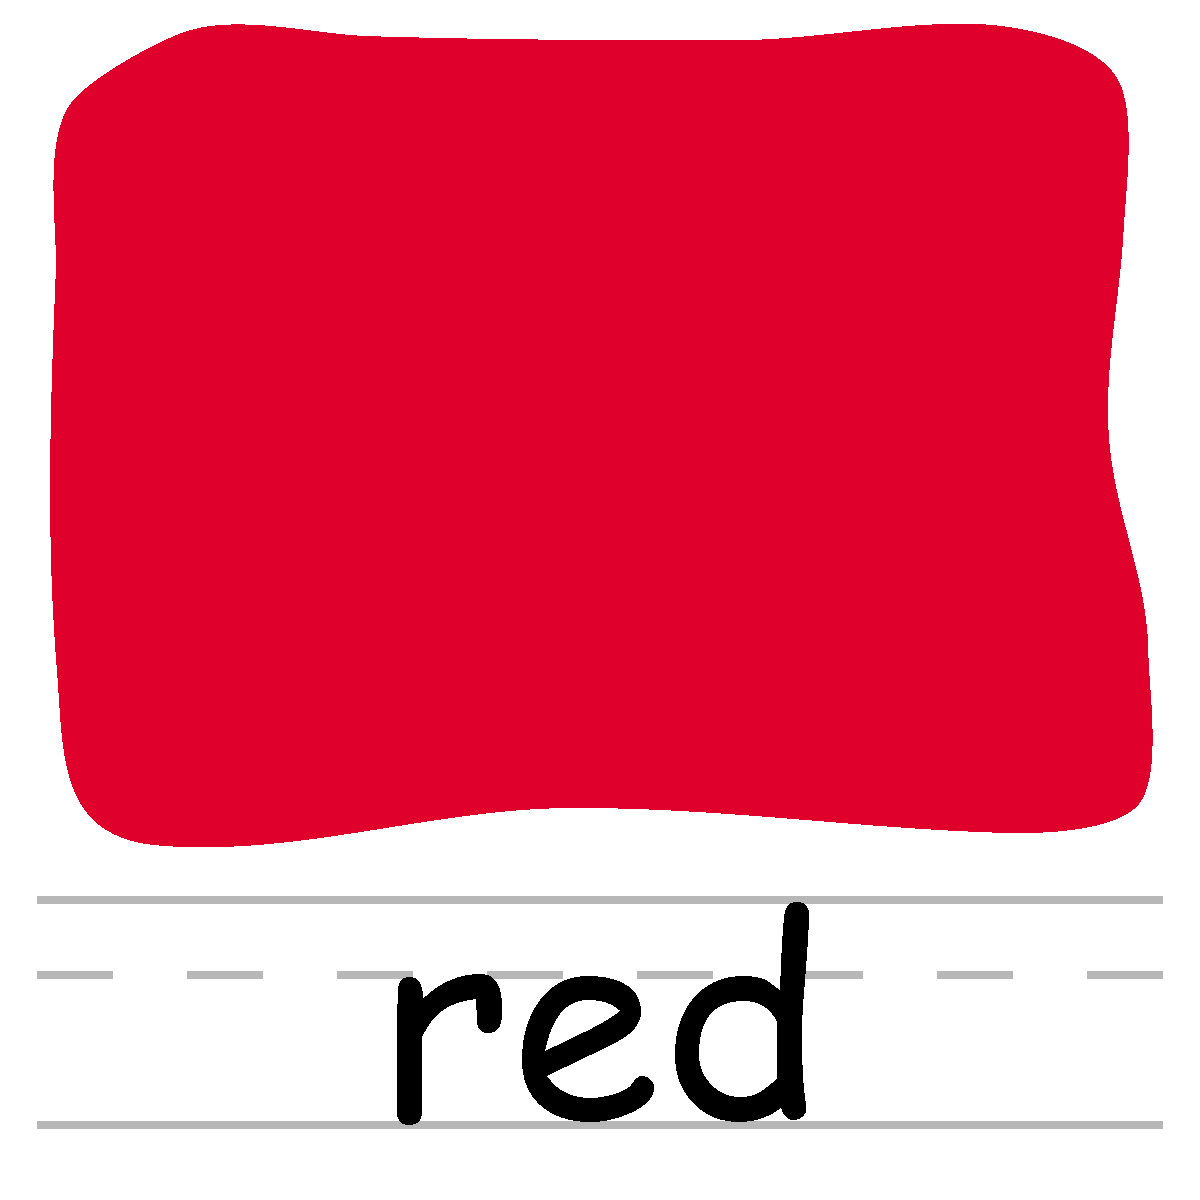 Red clip art free clipart images jpg